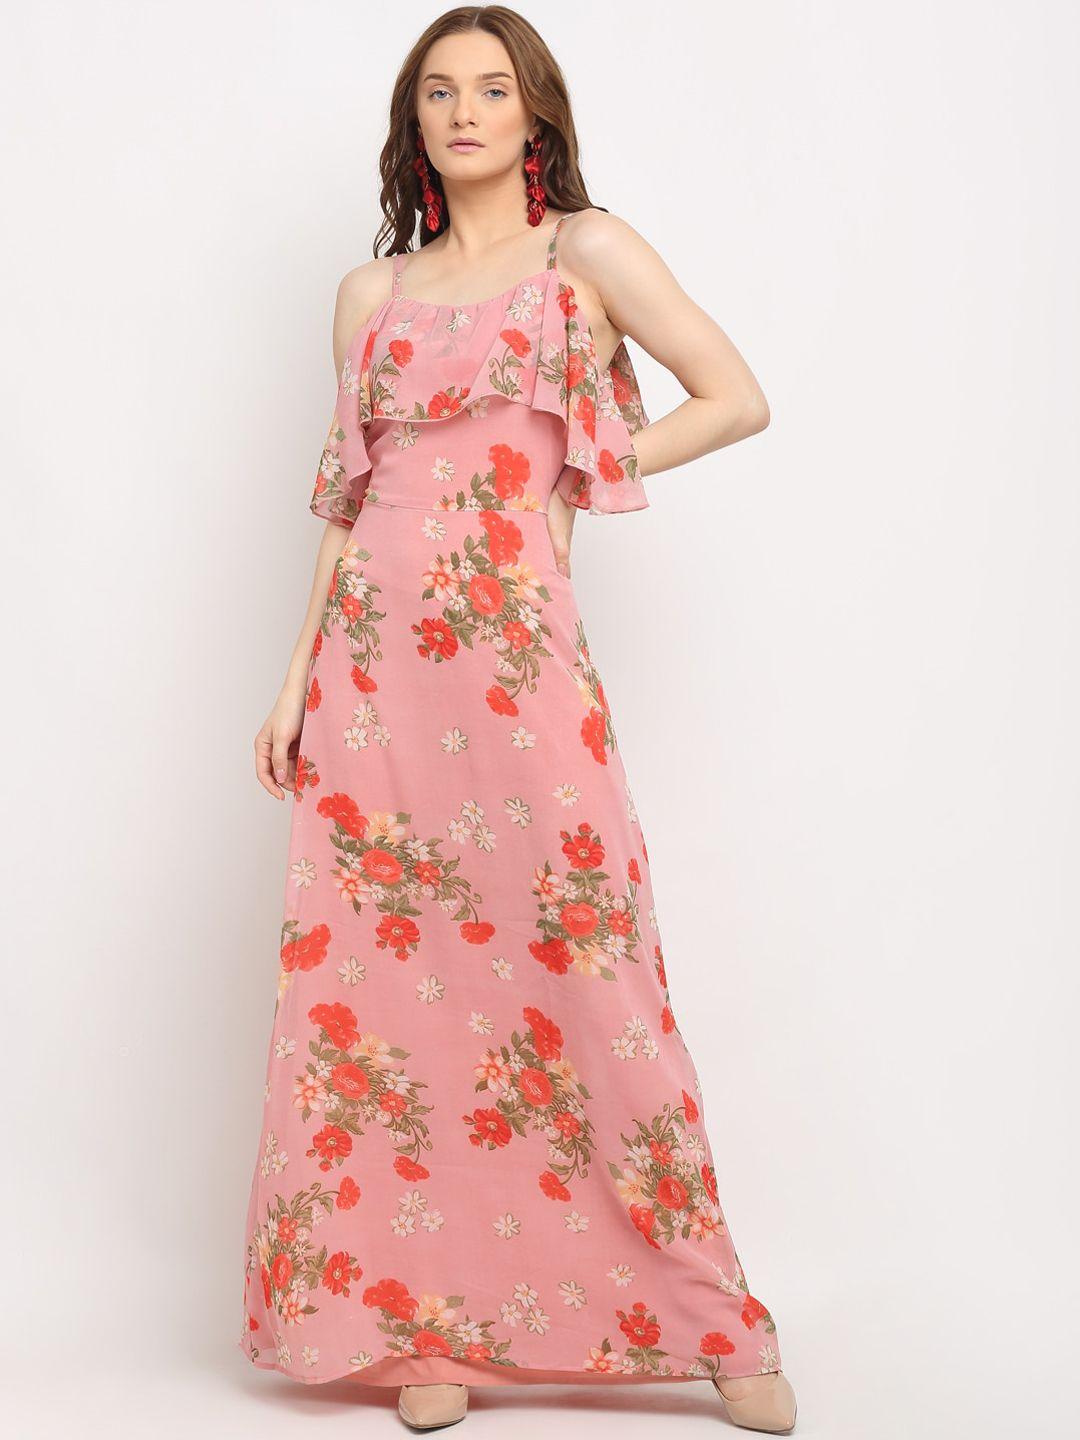 la-zoire-pink-&-red-floral-maxi-dress-with-ruffled-details